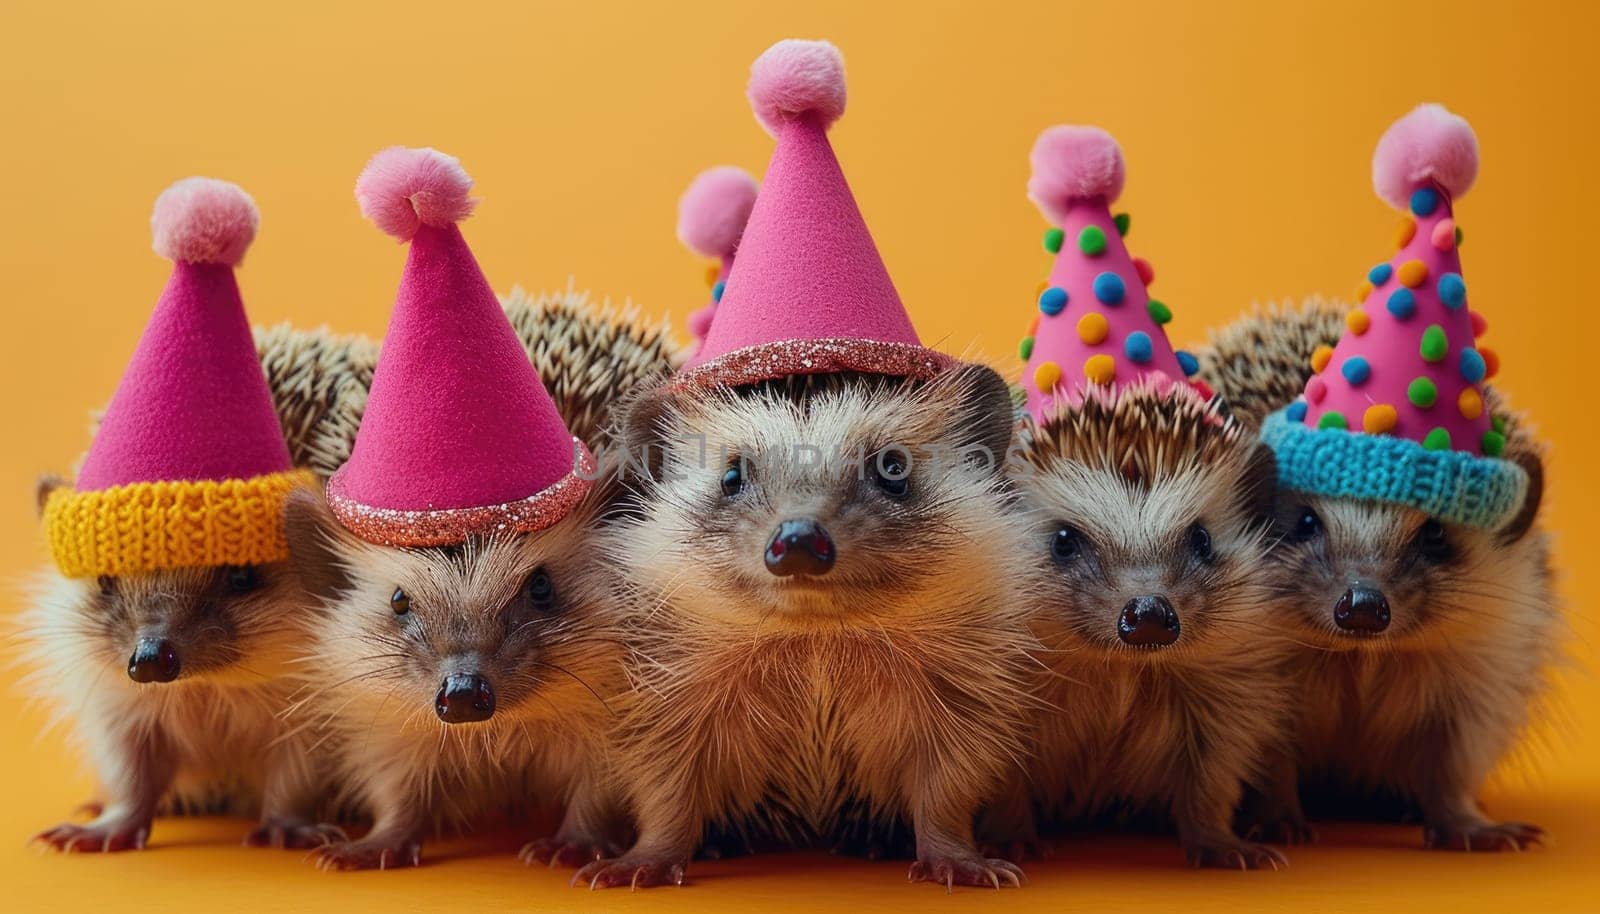 A group of hedgehogs wearing party hats by AI generated image.